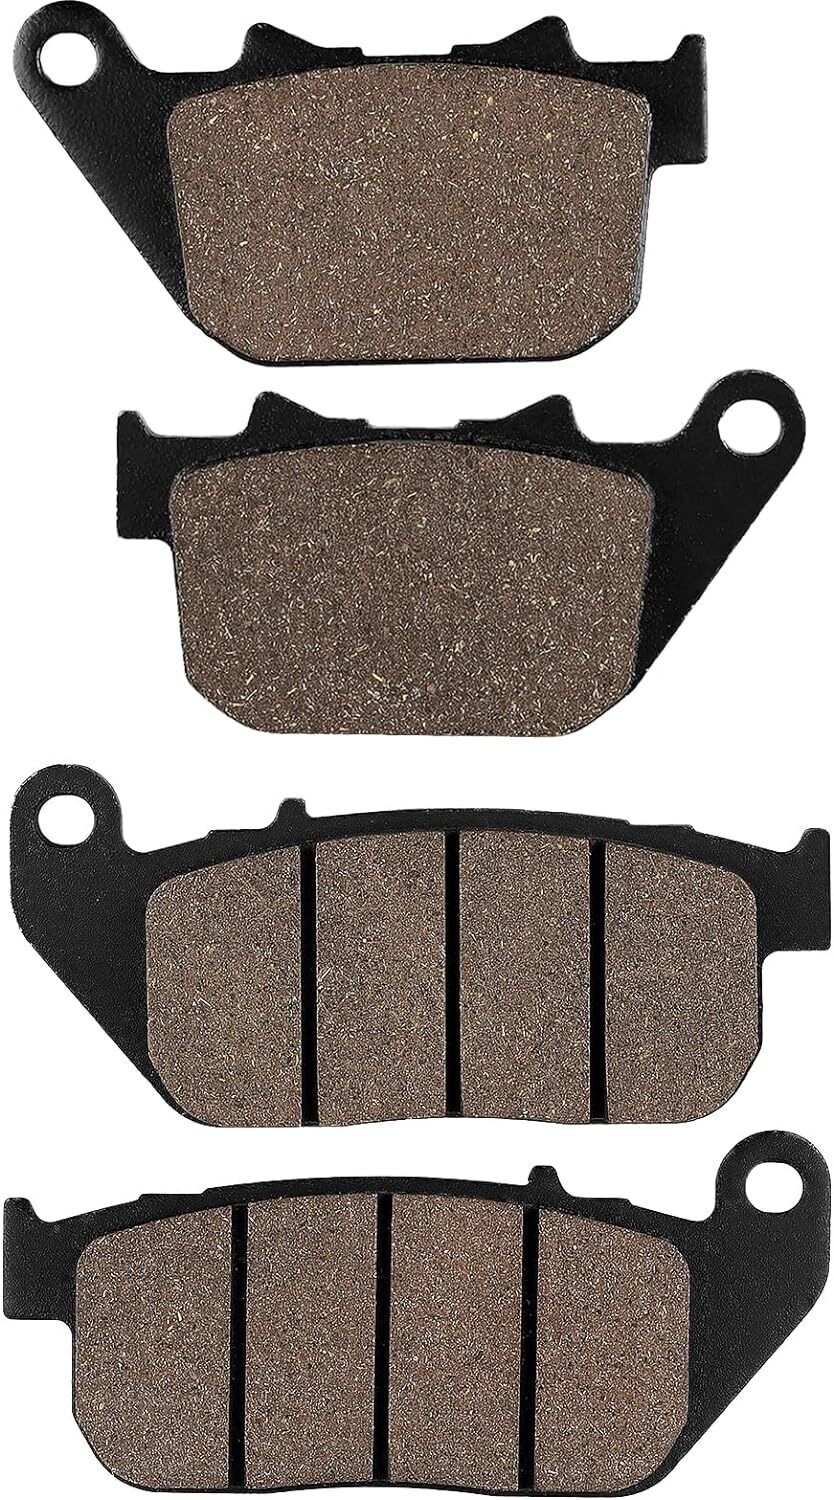 Front and Rear Brake Pads for HARLEY DAVIDSON Sportster 1200 XL1200C Custom